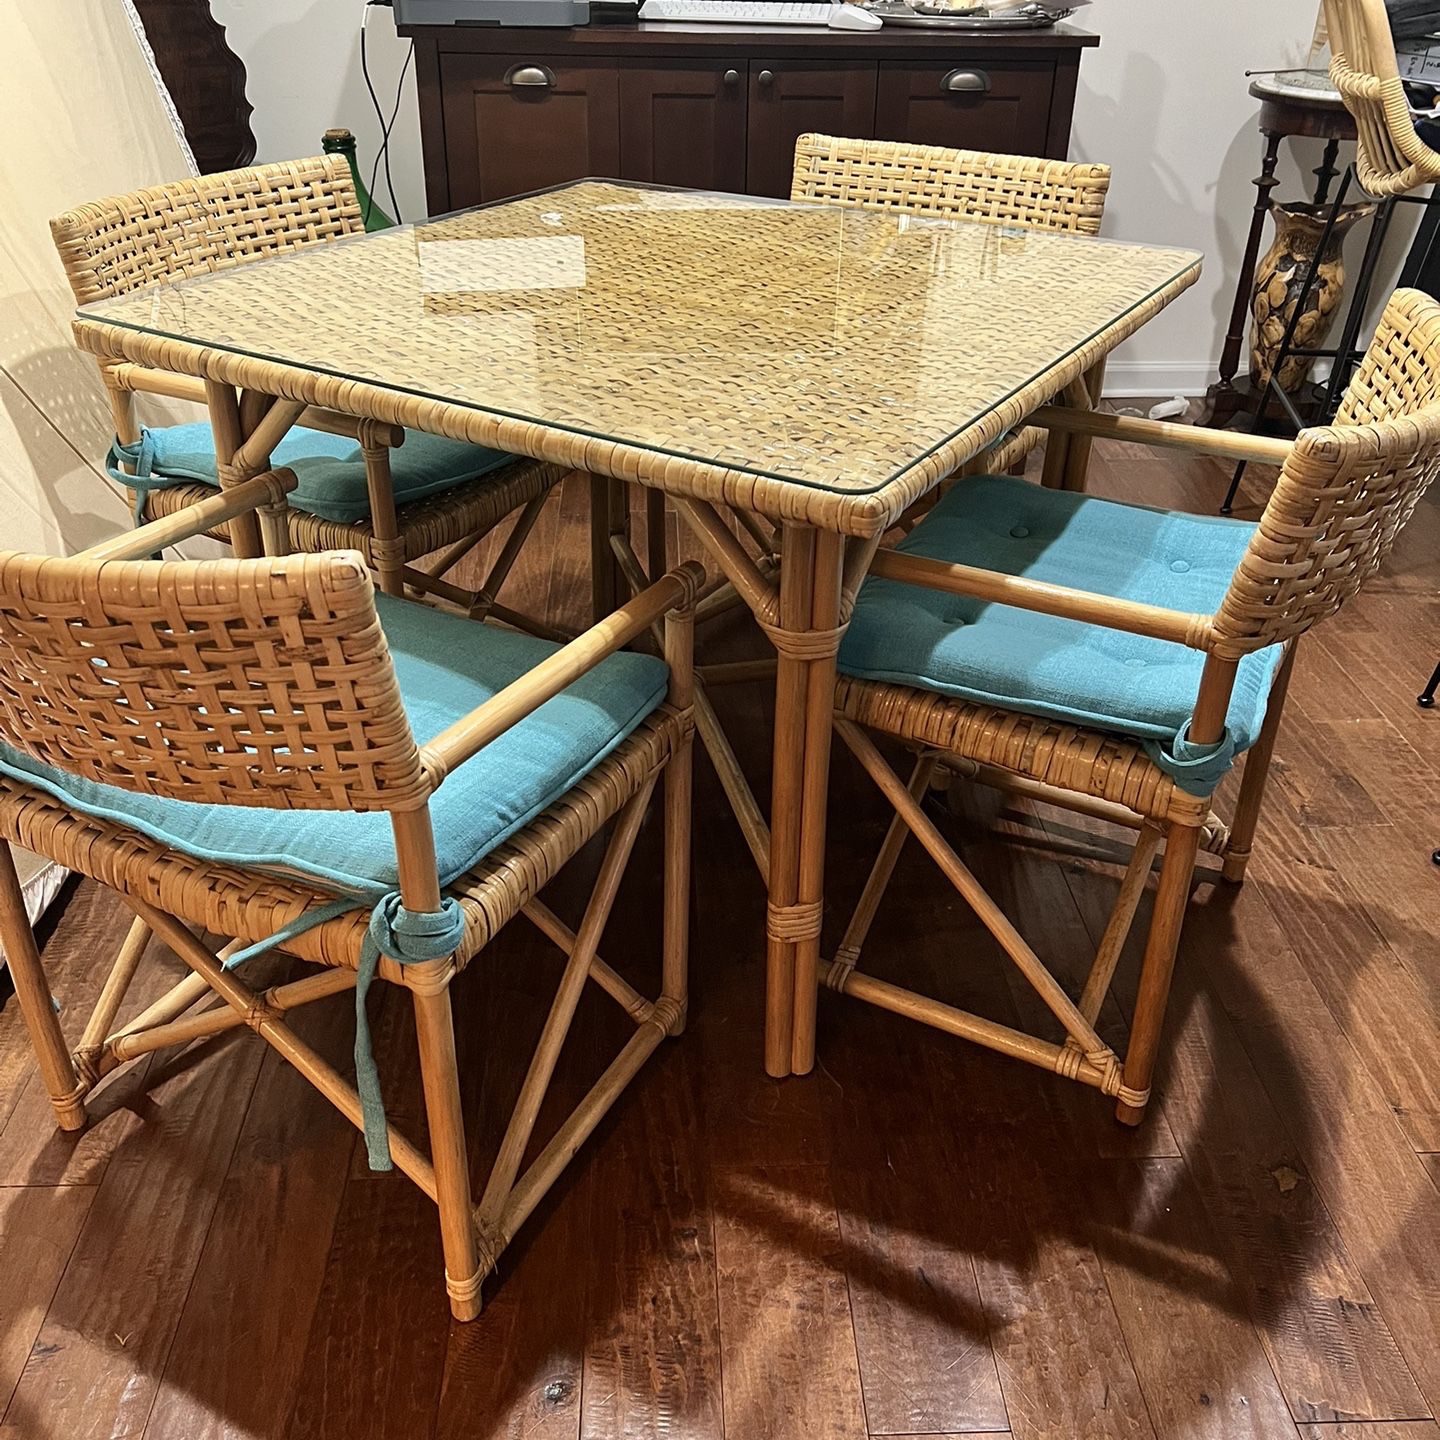 Vintage rattan Table & 4 chairs